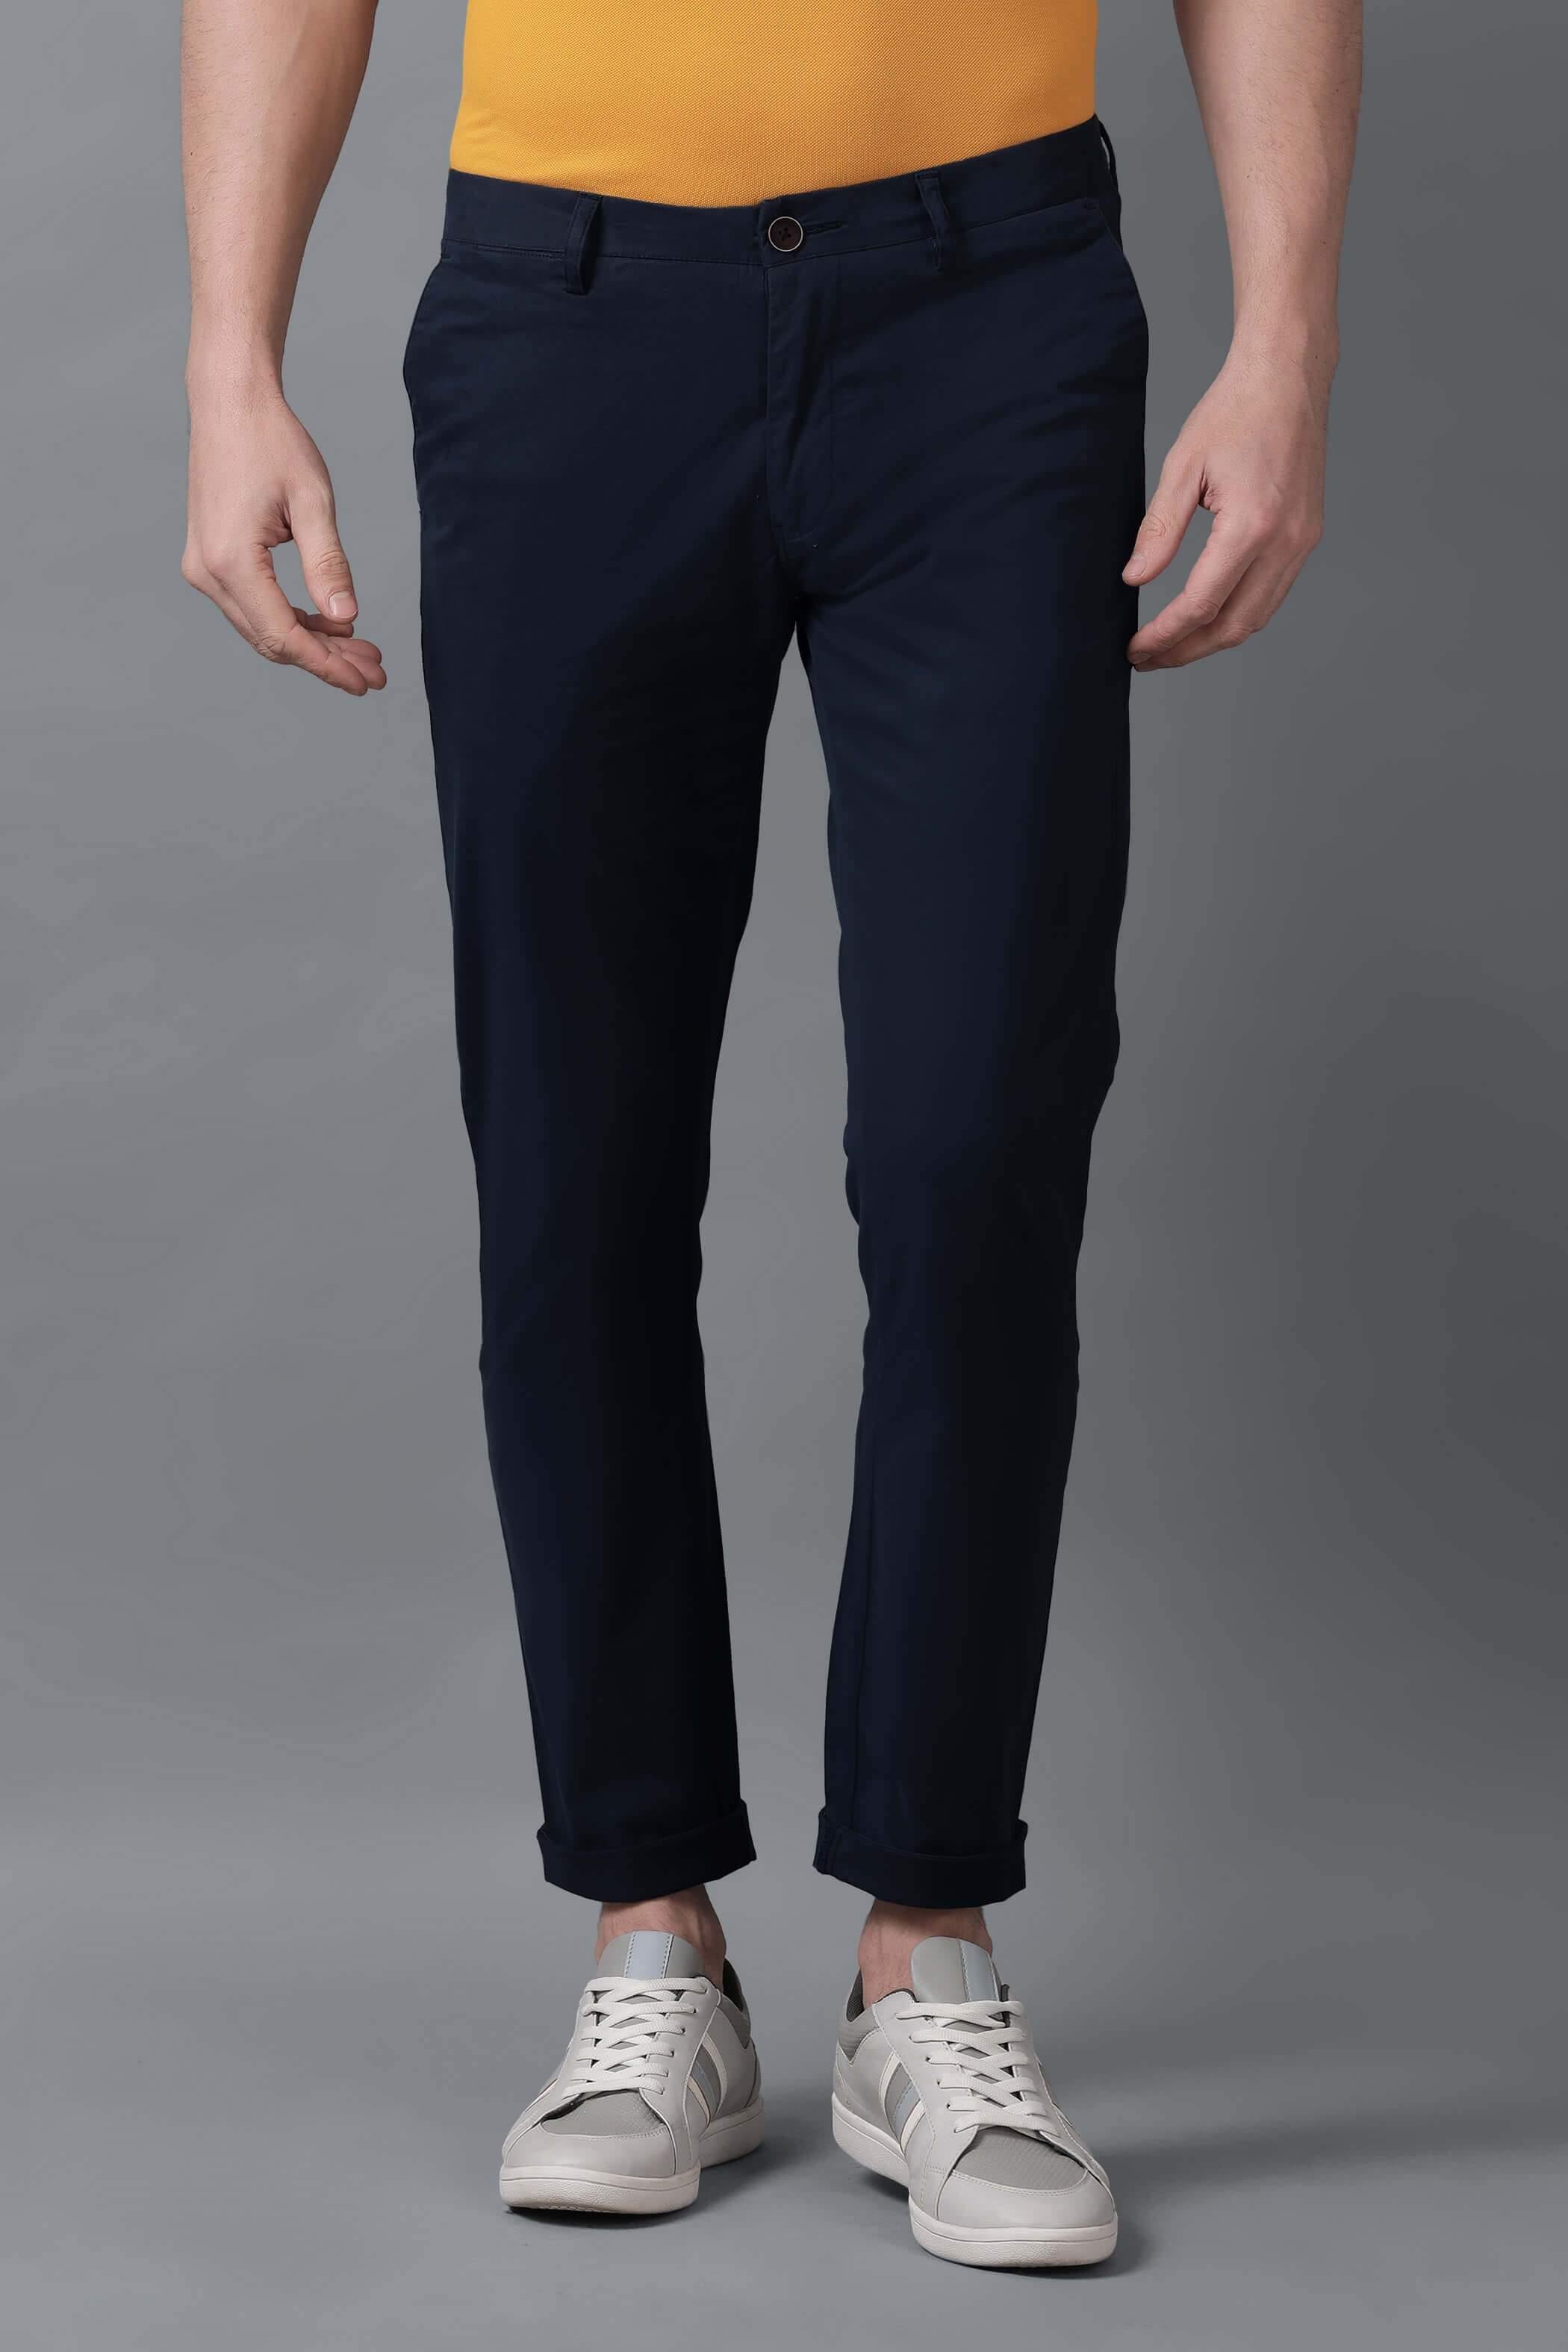 50 OFF on Louis Philippe Sport Men Slim Fit Chinos Trousers on Myntra   PaisaWapascom